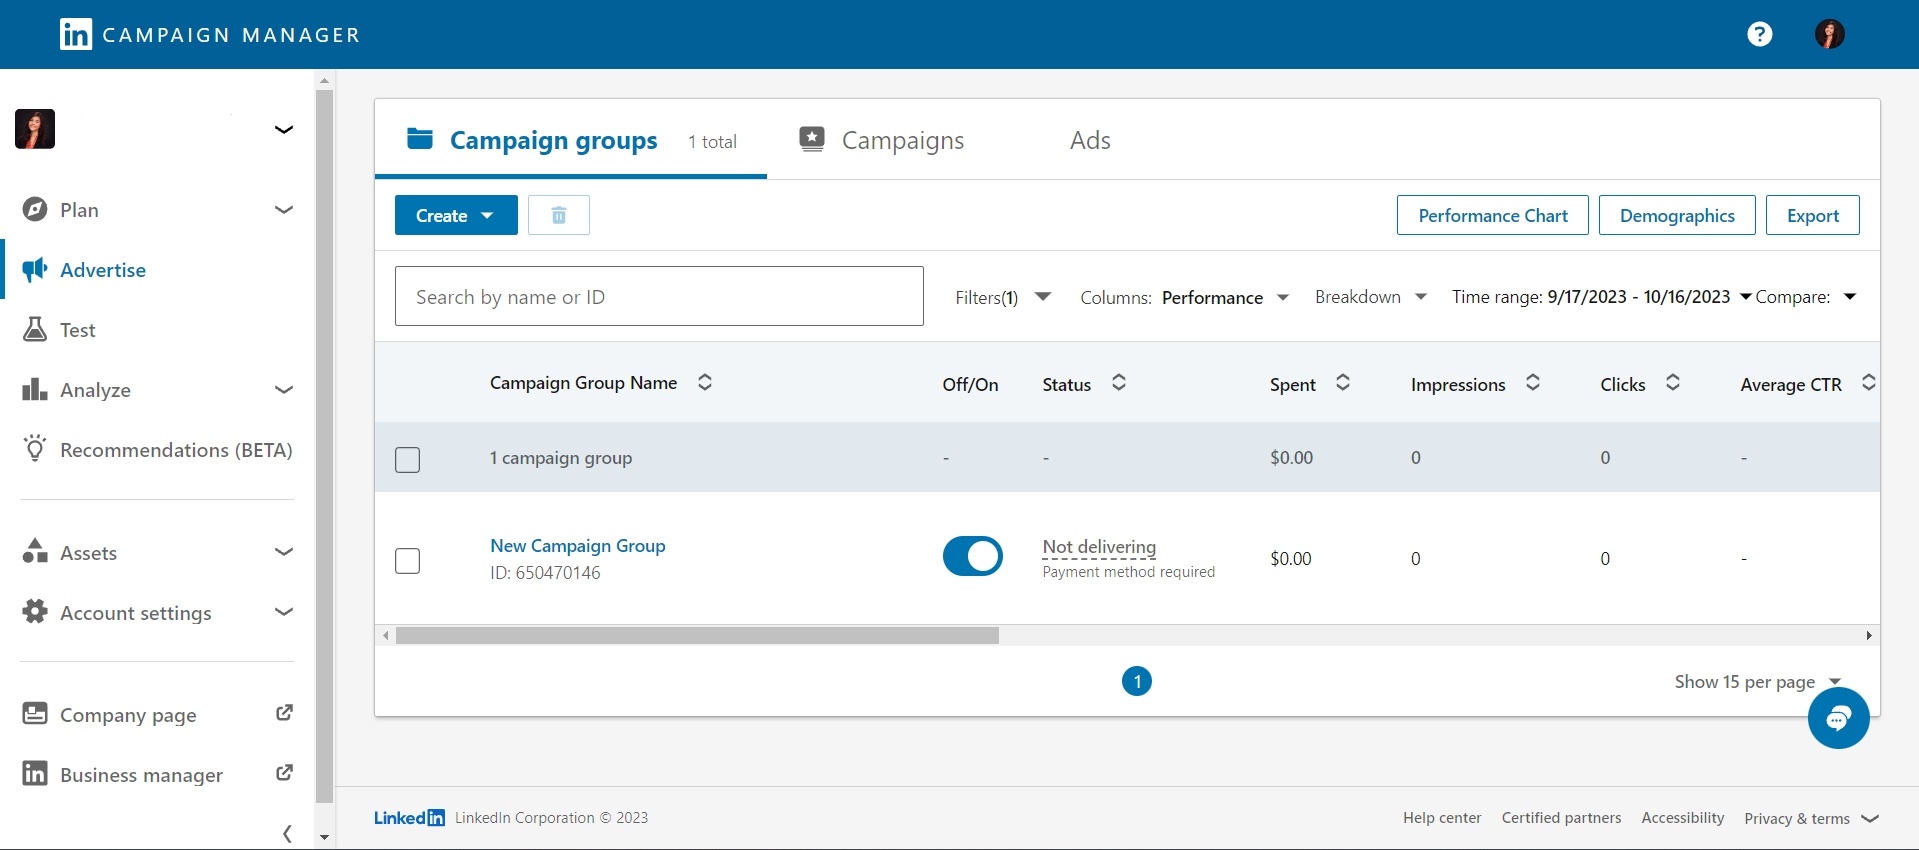 LinkedIn campaign manager overview for Lead Generation